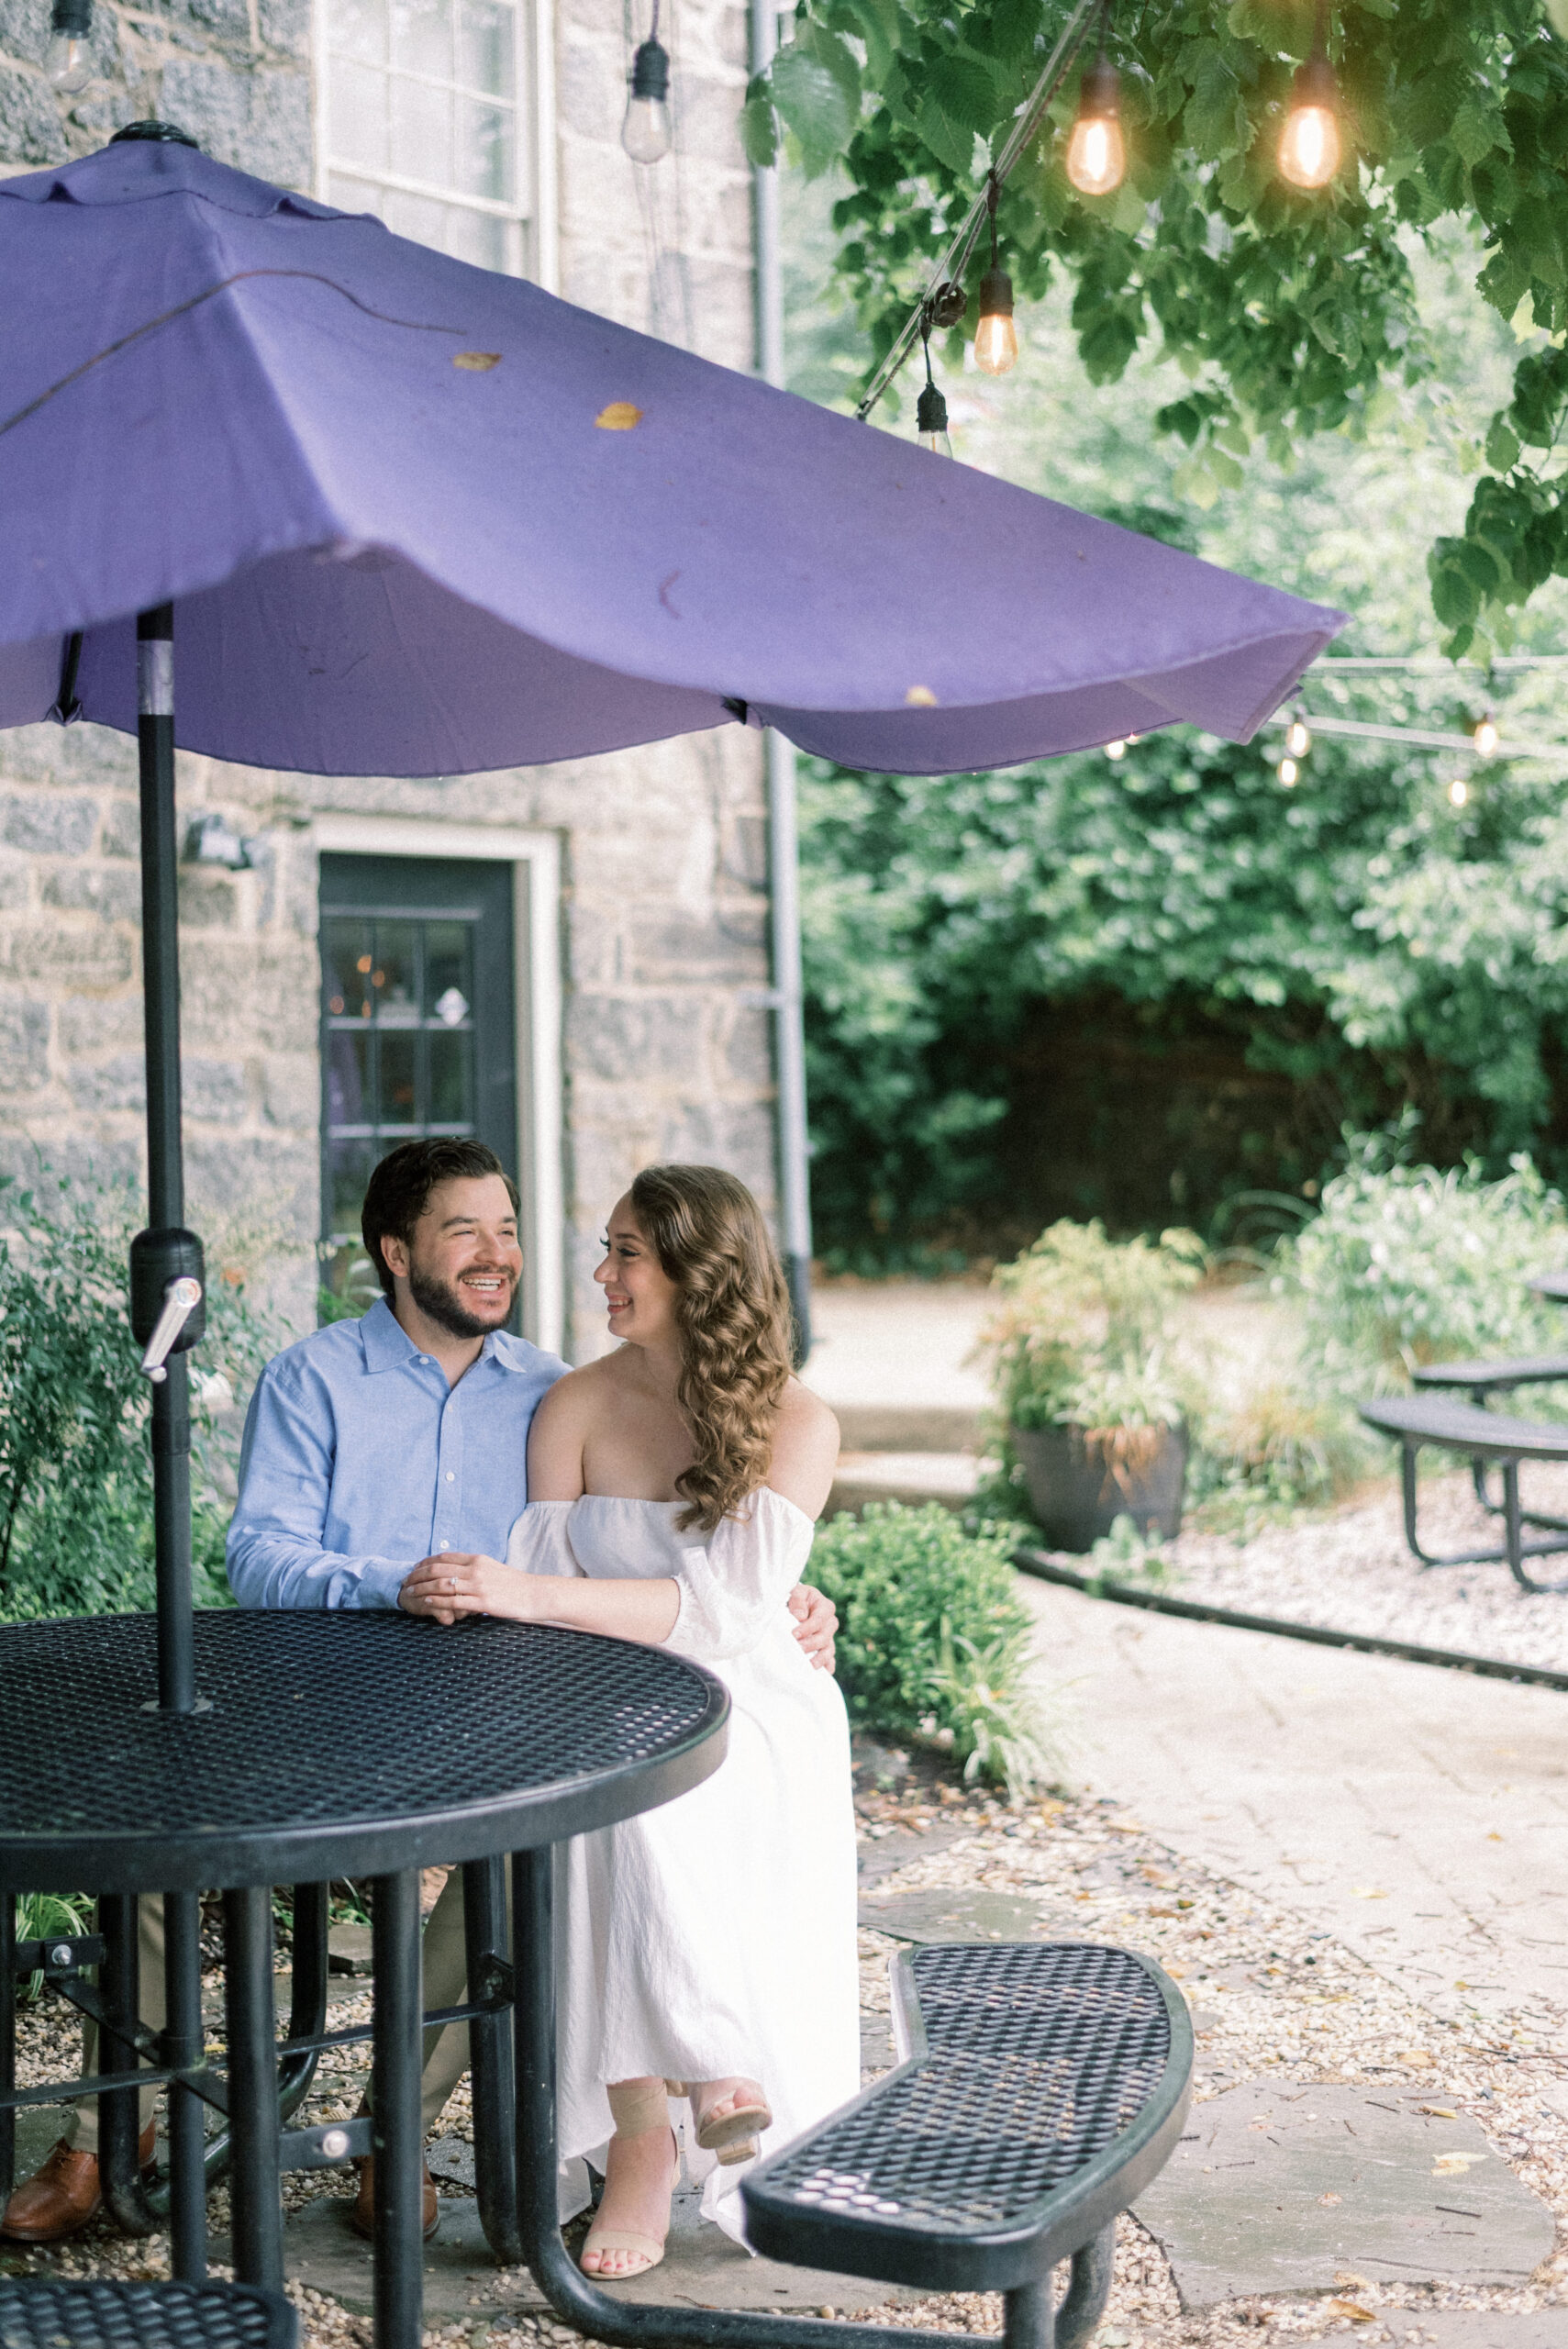 Maryland wedding photographer captures couple sitting together at table